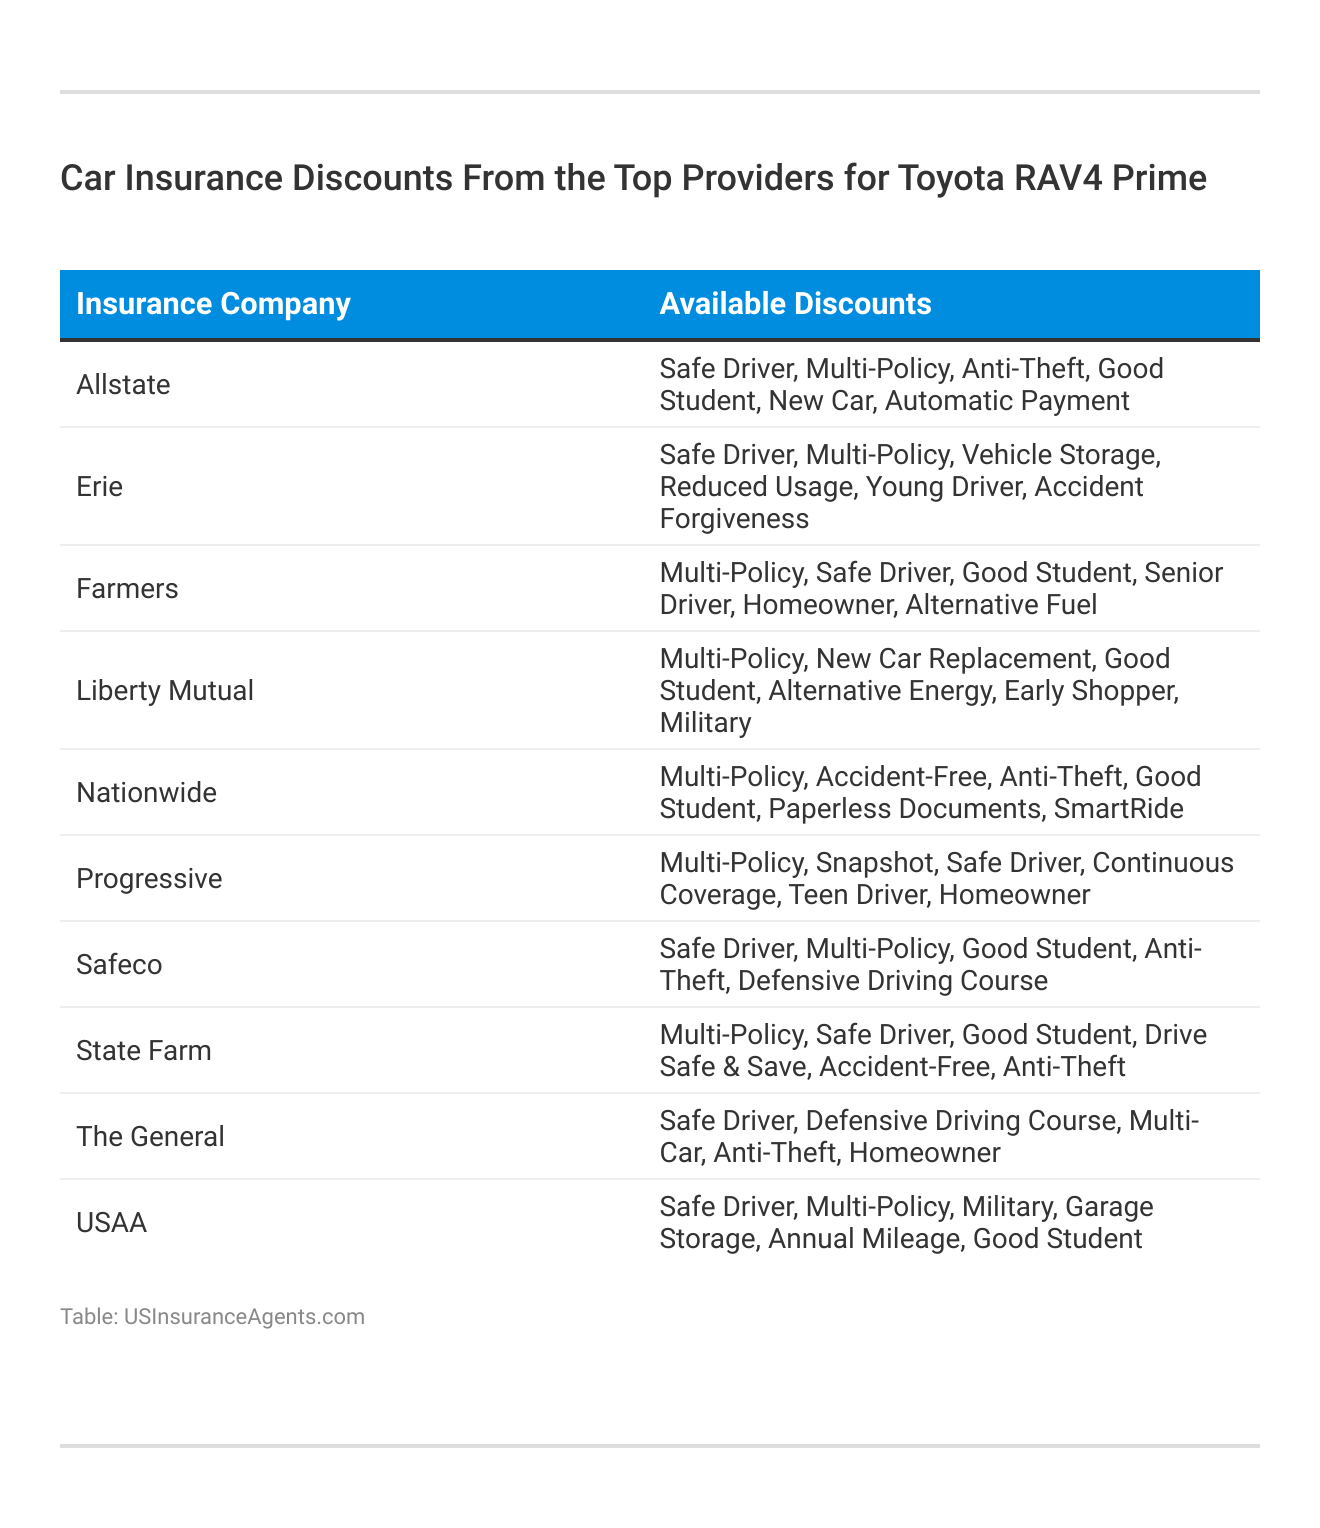 <h3>Car Insurance Discounts From the Top Providers for Toyota RAV4 Prime</h3> 